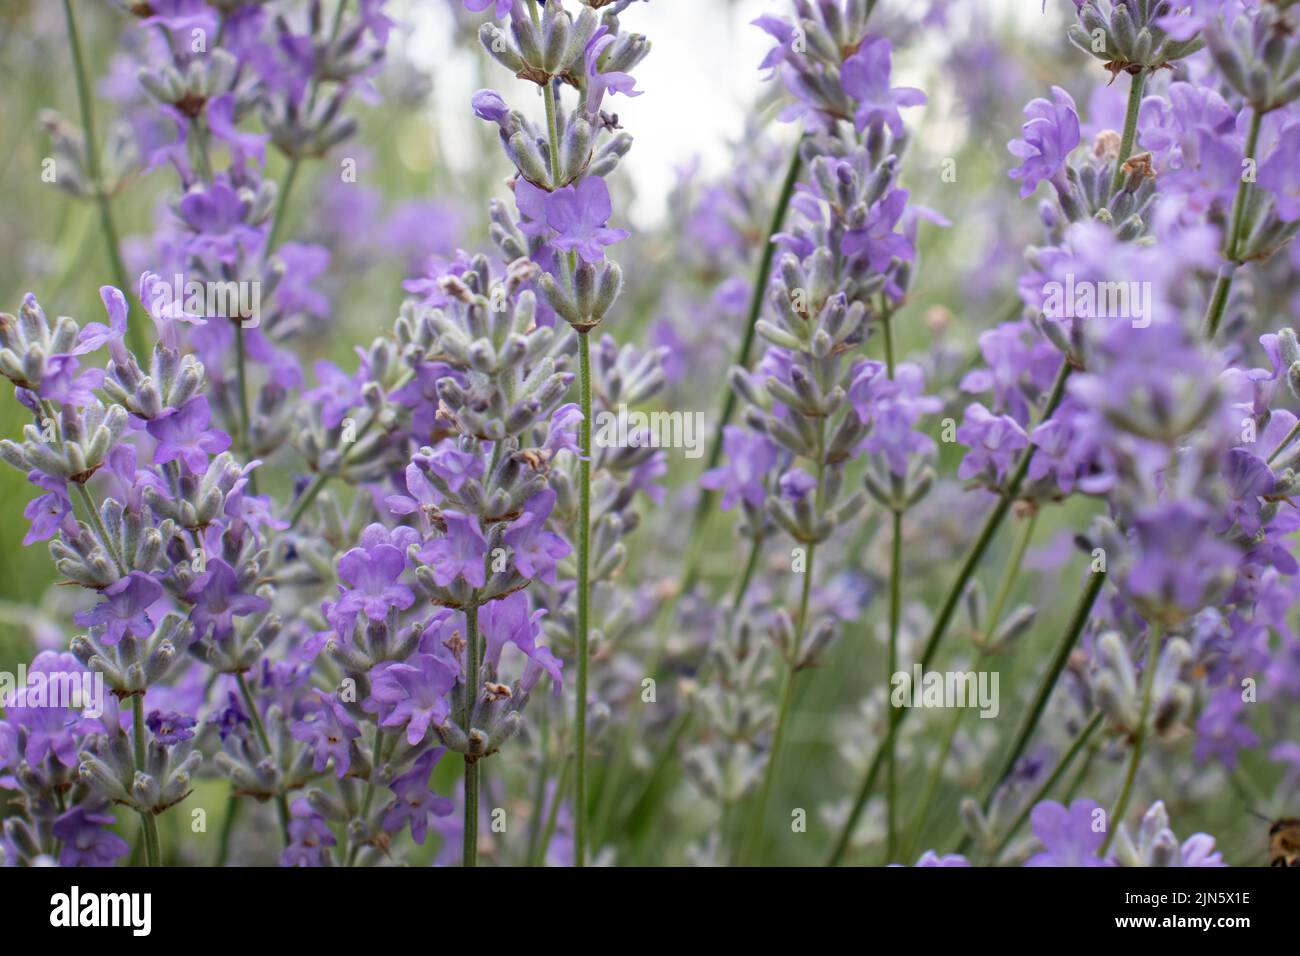 Purple Lavender flowers in the summer garden. Natural blurred floral background. Lavender field. Stock Photo